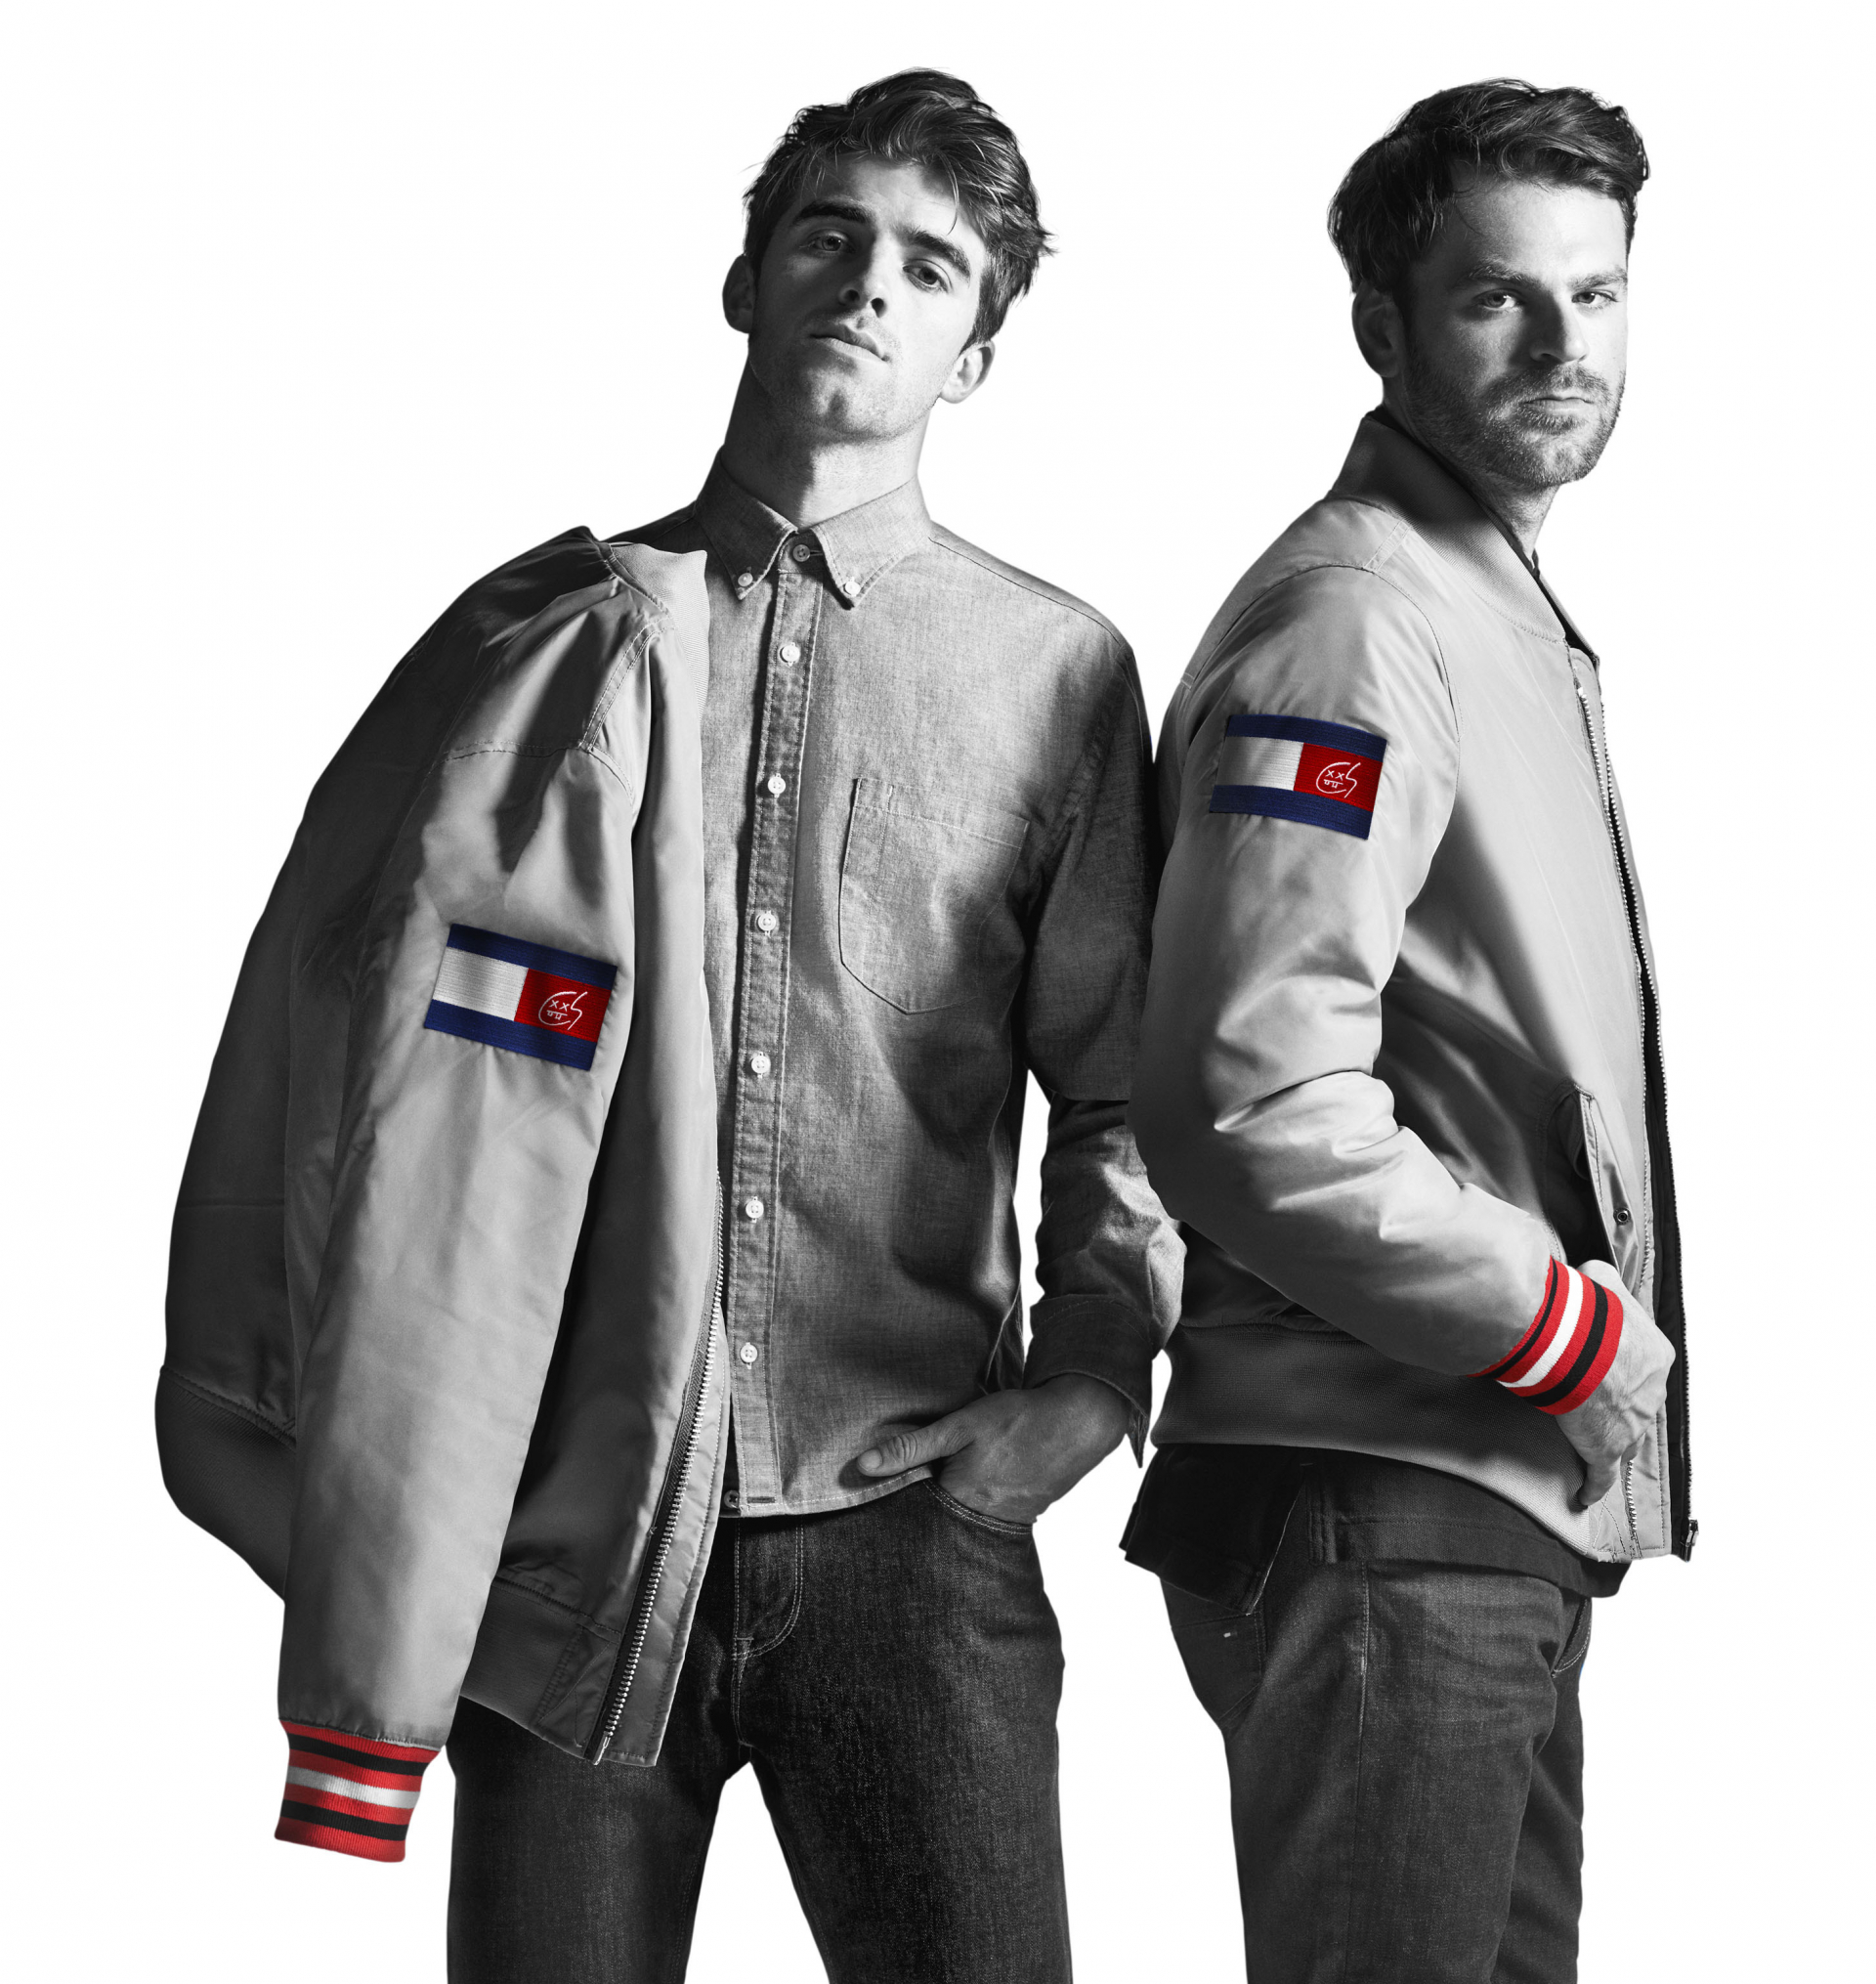 Tommy Hilfiger'ın yeni marka elçisi: The Chainsmokers